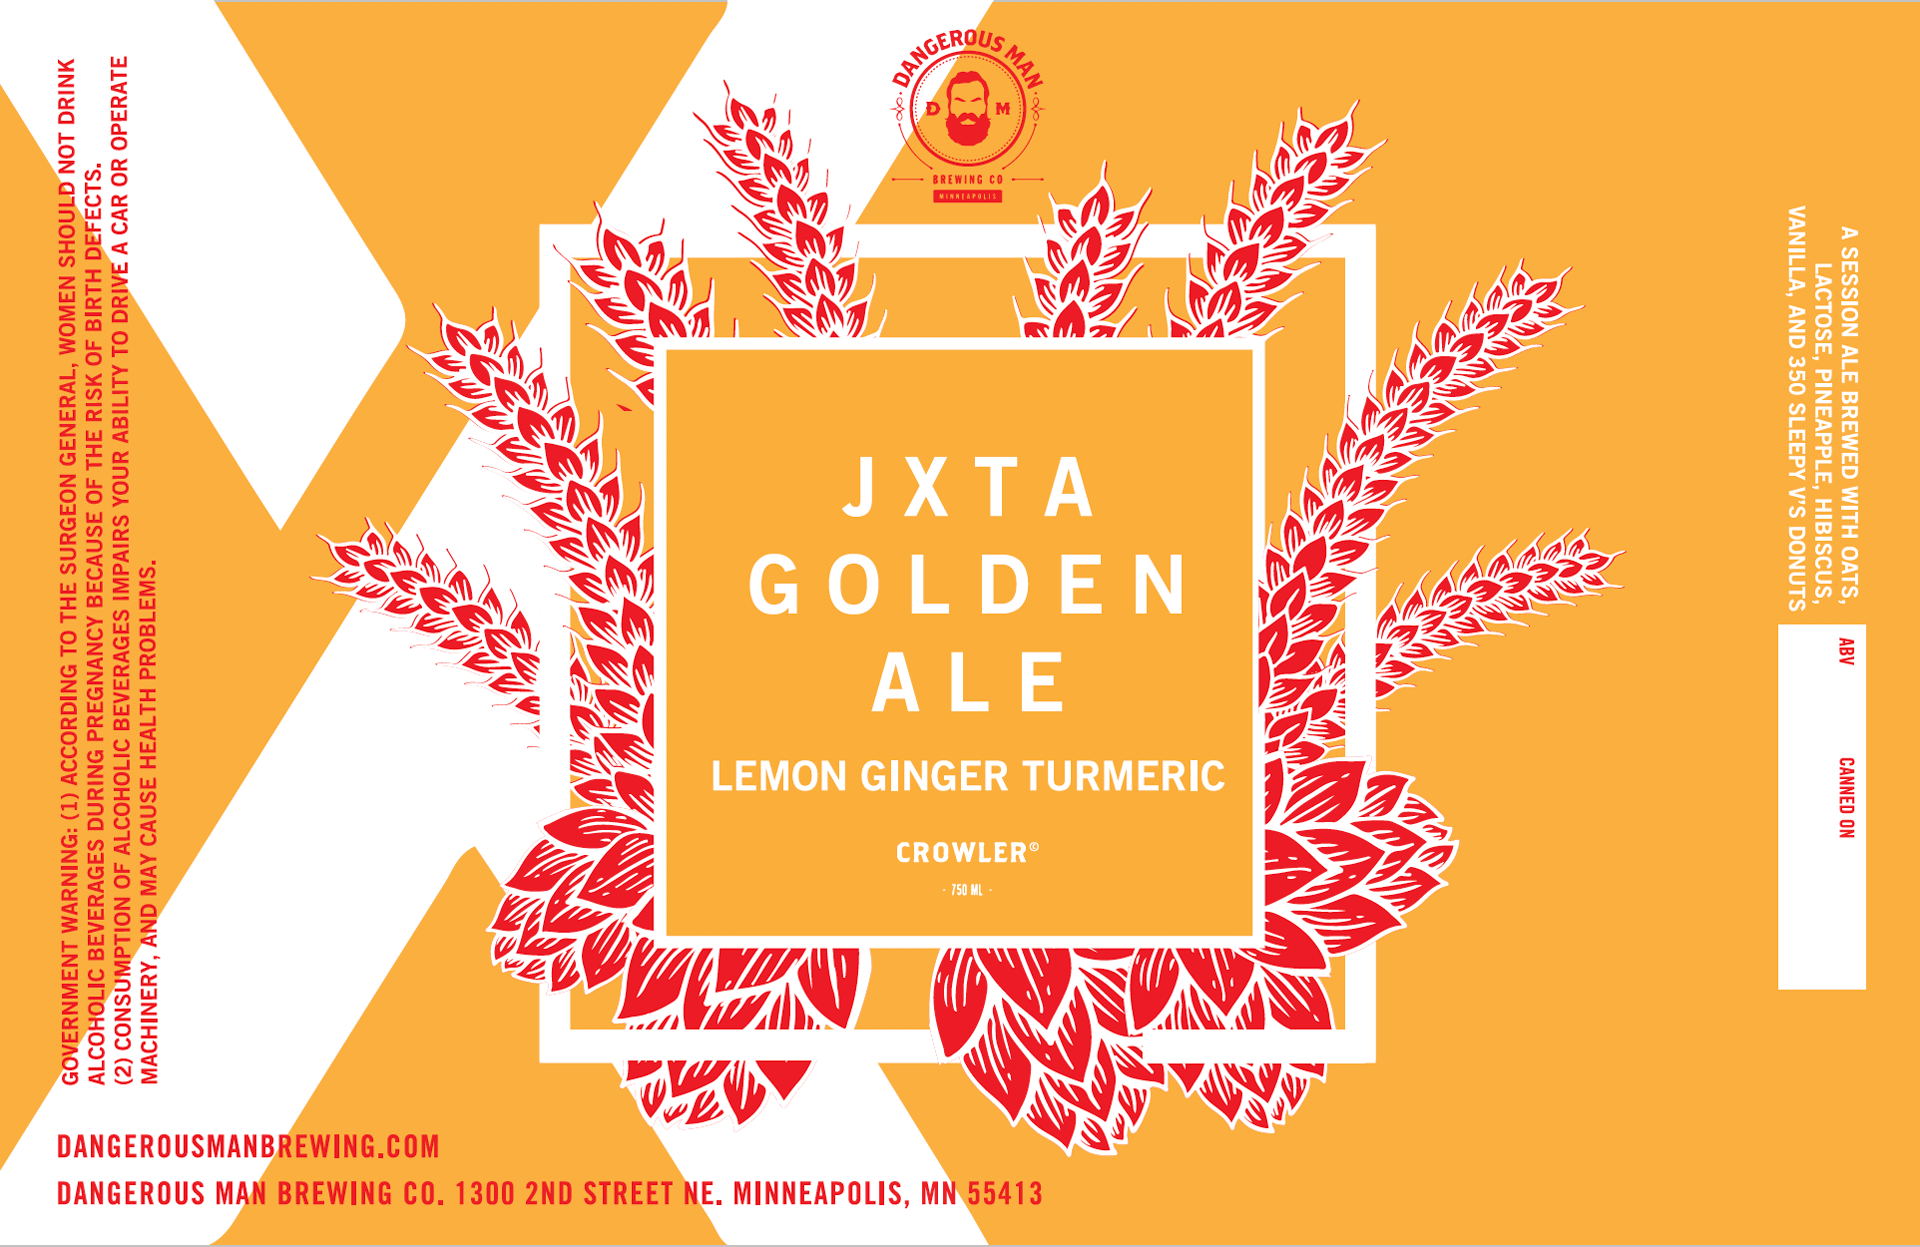 An example of a beer can lable for JXTA Golden Ale